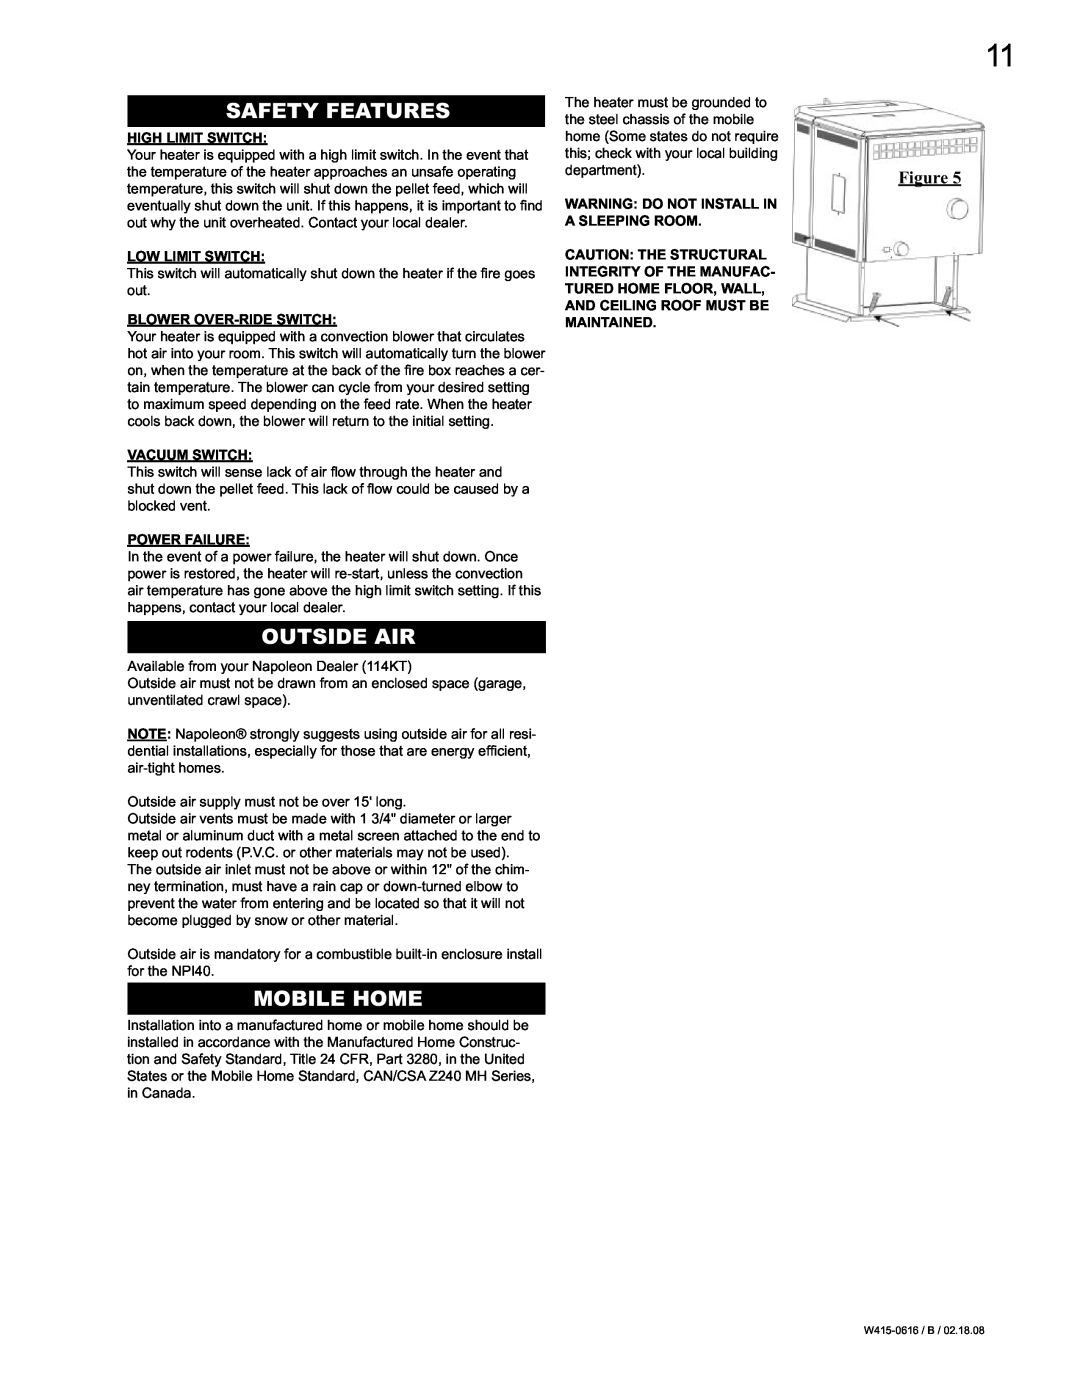 Napoleon Fireplaces NPS40, NPI40 manual Safety Features, Outside Air, Mobile Home 